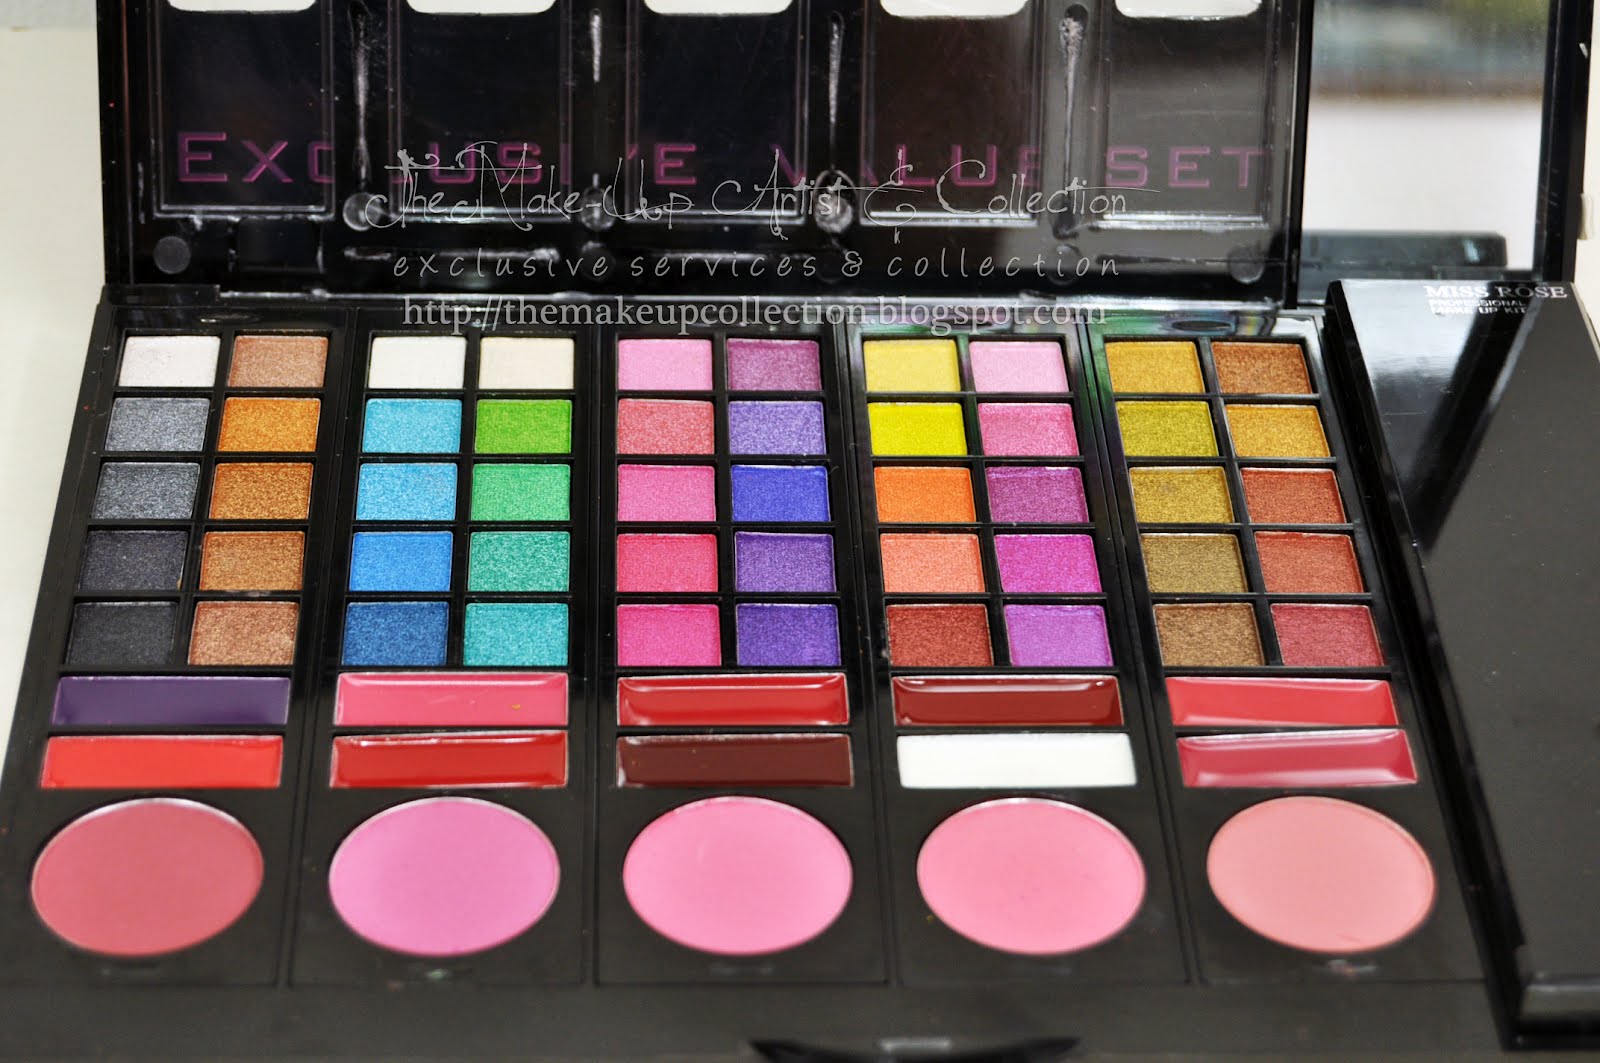 The Make-Up Artist & Collection: Make-Up Palette: MISS ROSE from Dubai